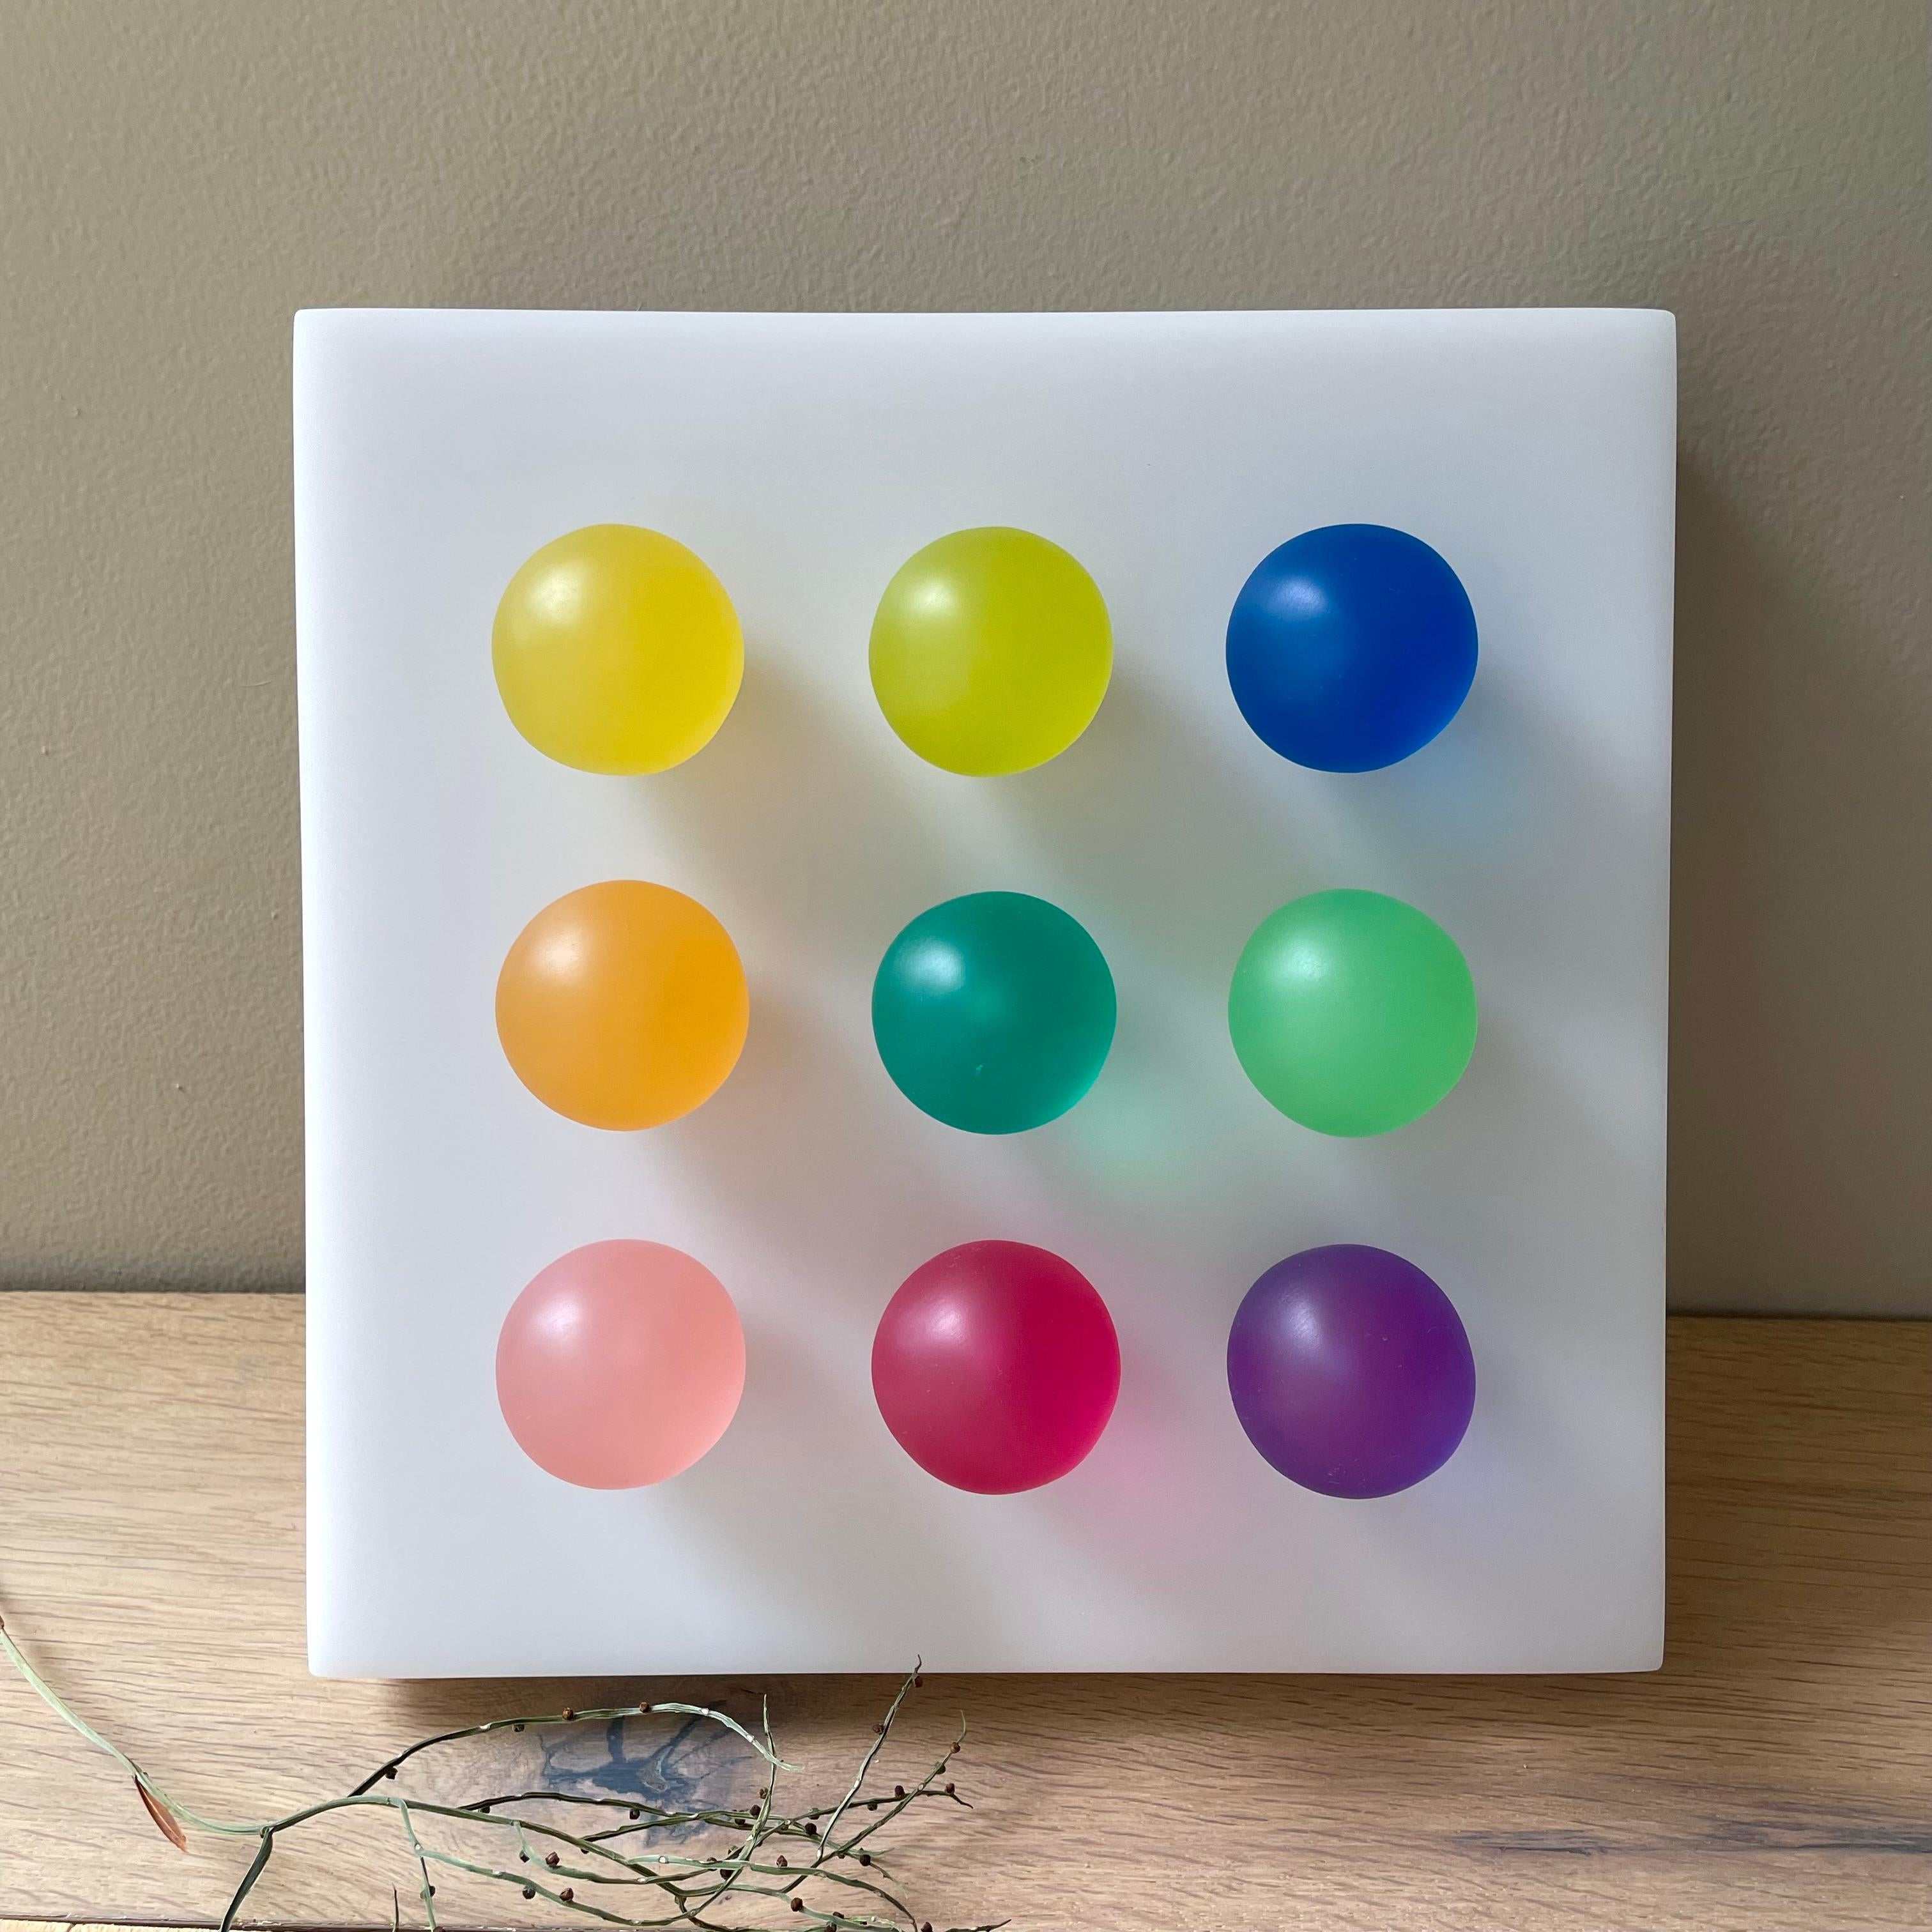 It is a geometric, simple and contemporary piece with a lot of personality. It will add a playful and colorful touch to your kids room.
You can hang the piece on a wall or place it on a table and lean it against the wall.

Material: Resin in